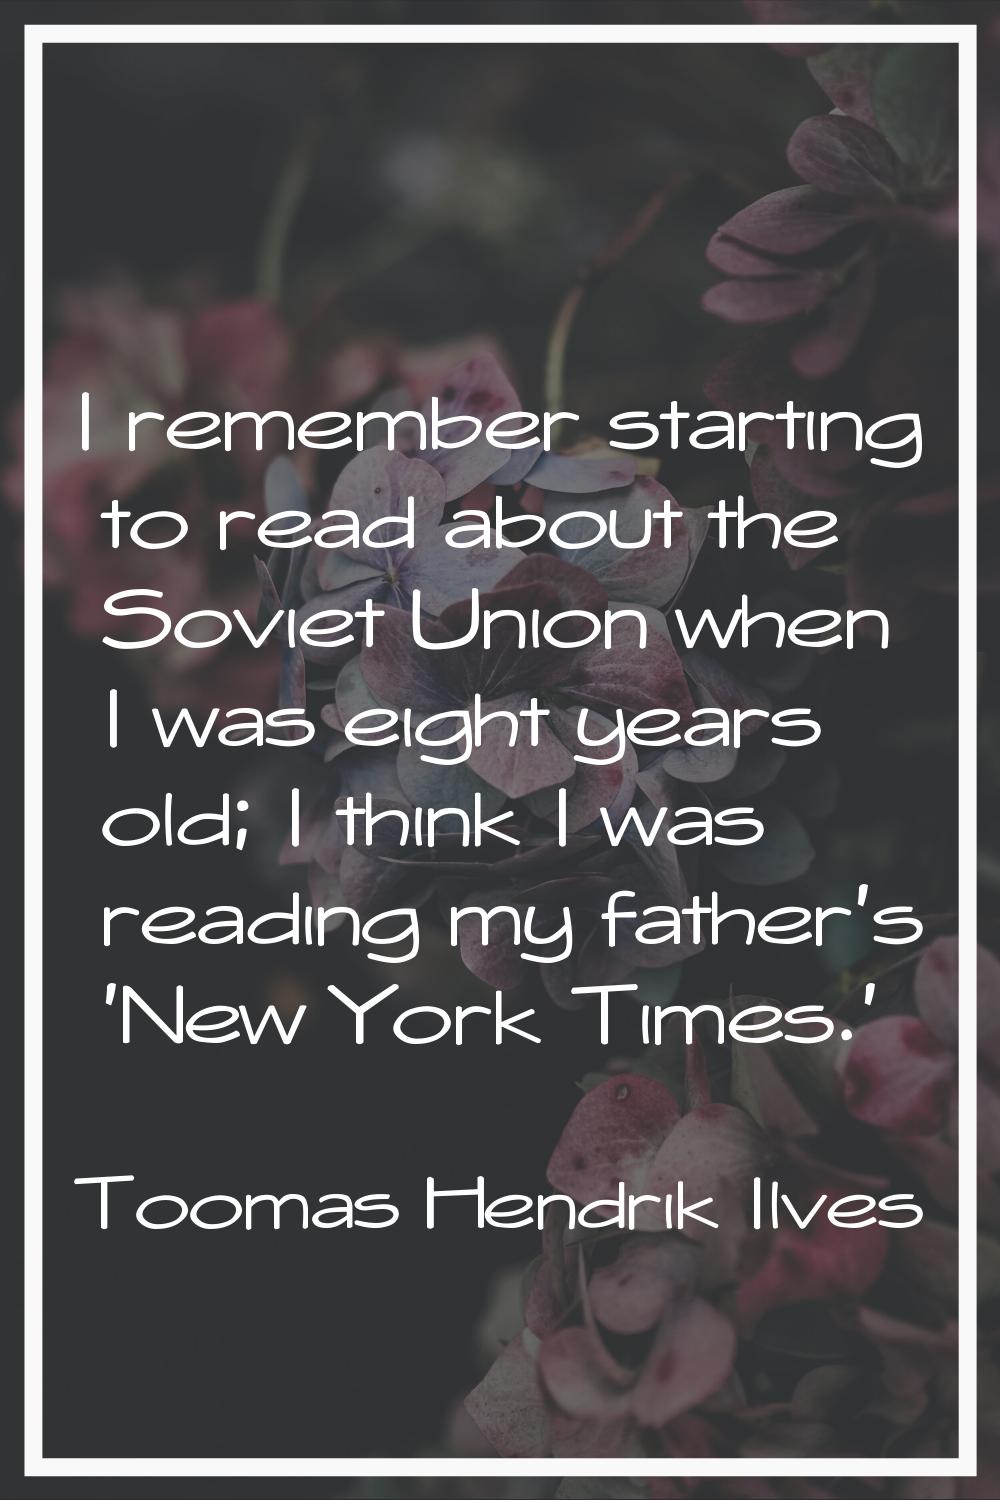 I remember starting to read about the Soviet Union when I was eight years old; I think I was readin